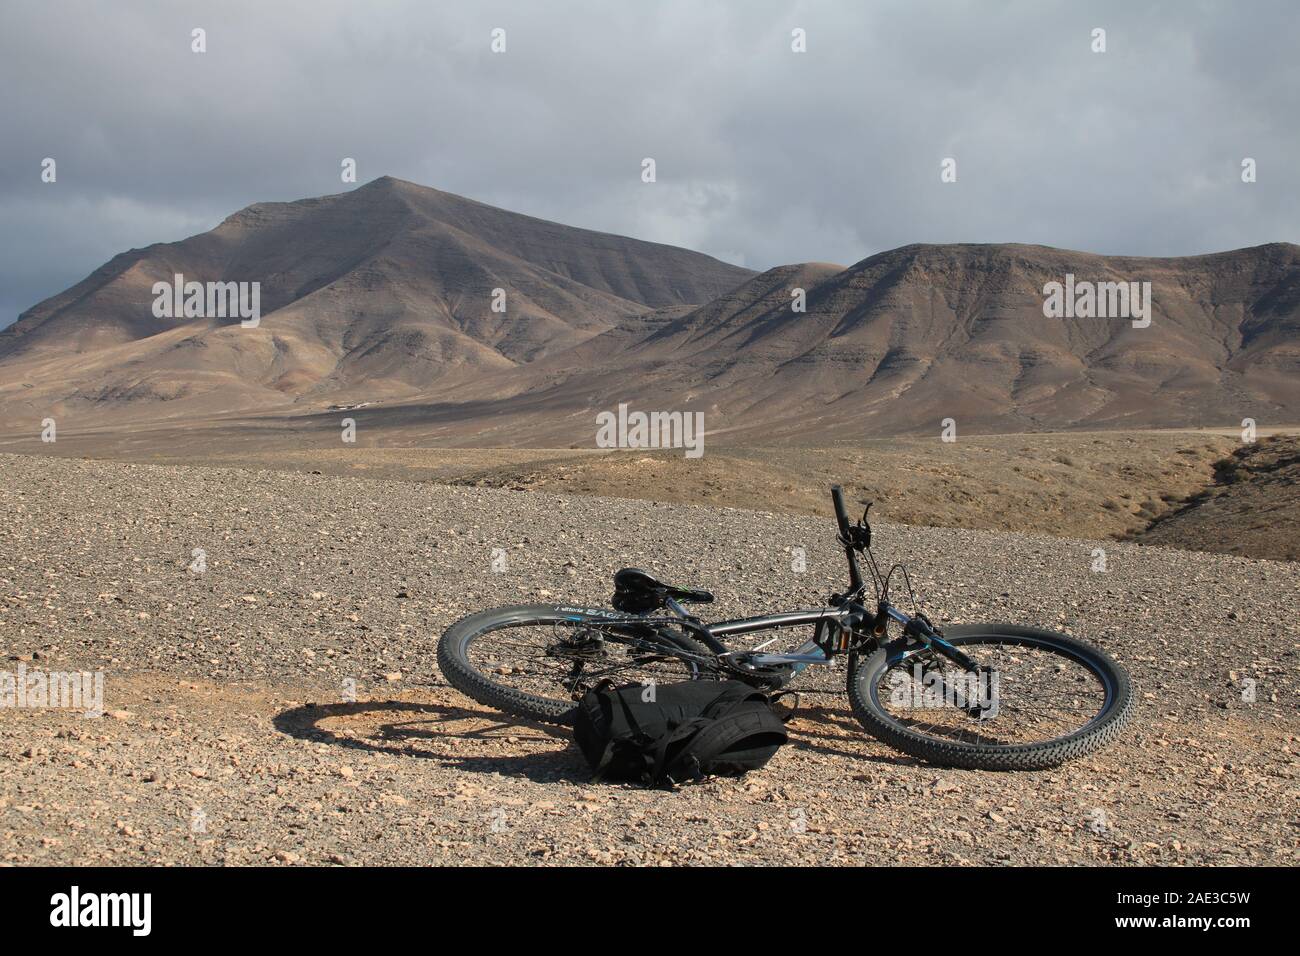 mountain bike laying on the floor with volcanic mountains in the background Stock Photo